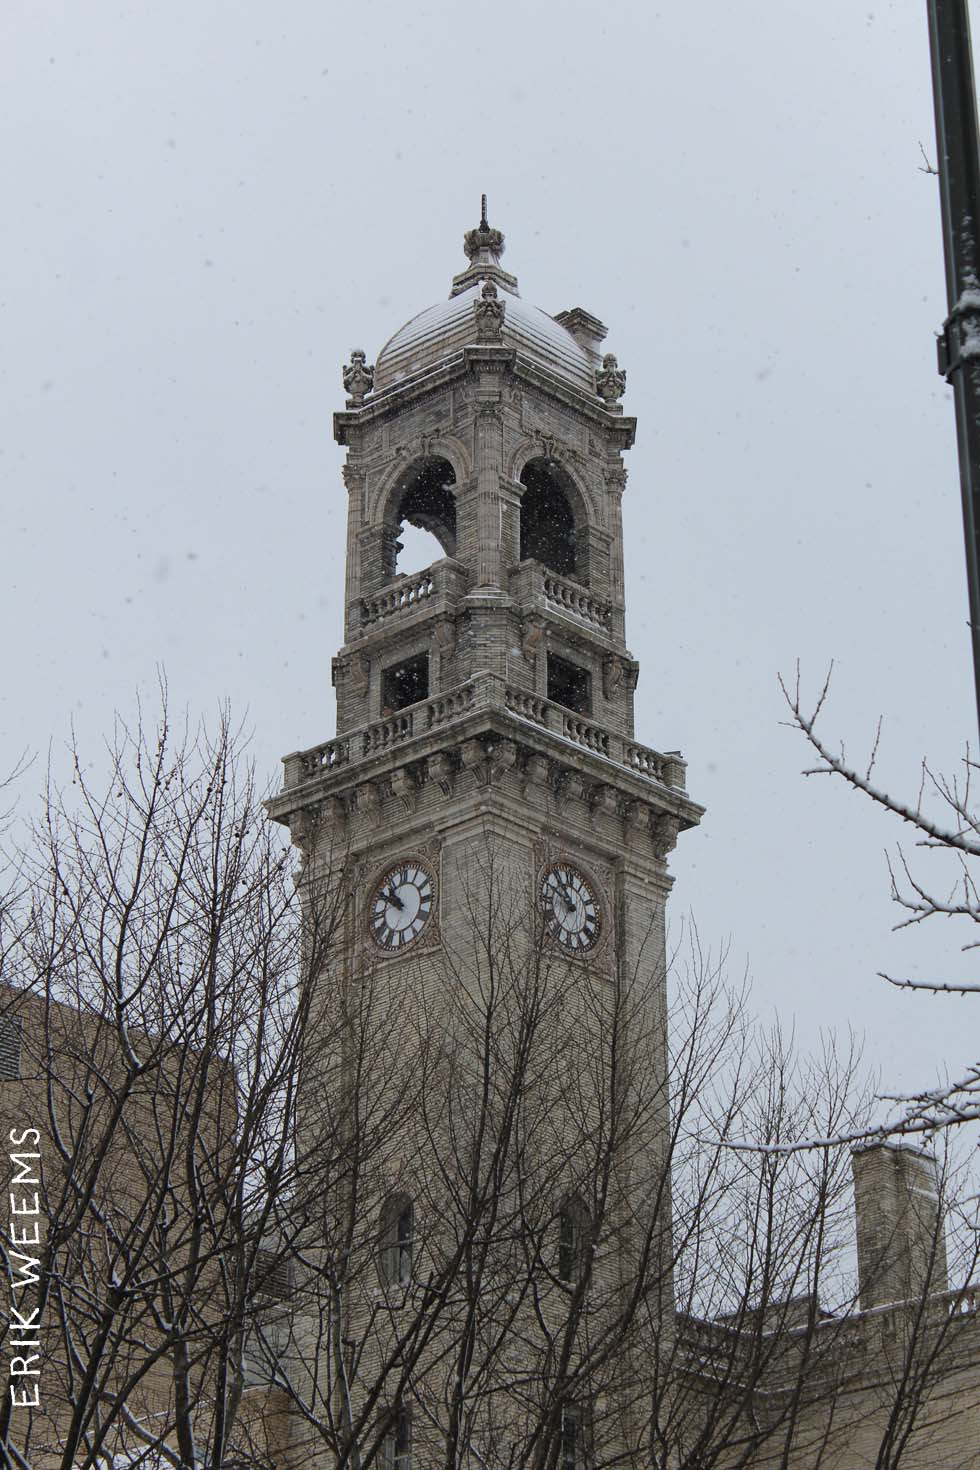 Jefferson Hotel in the SNow - Tower